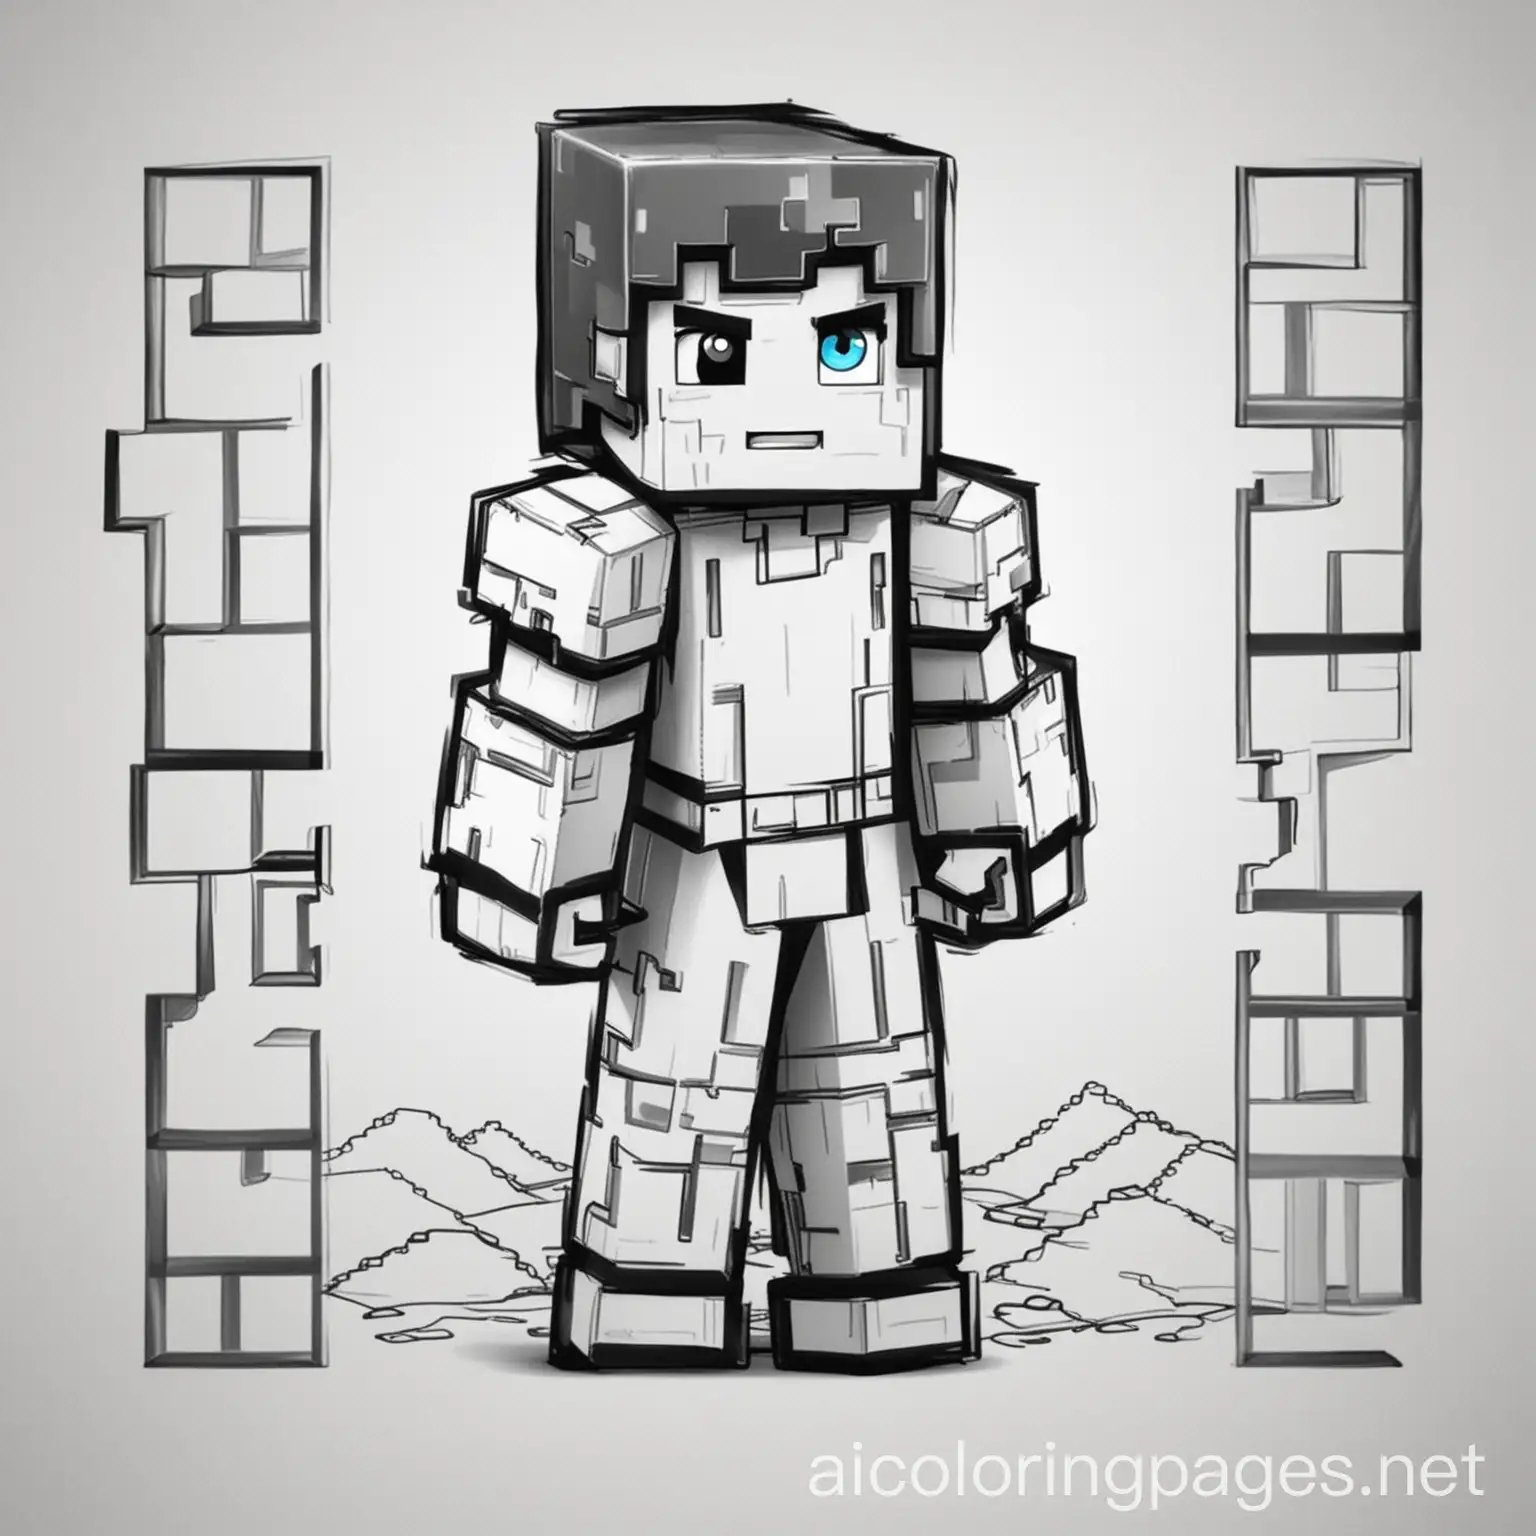 Minecraft-Coloring-Page-with-Simple-Line-Art-on-White-Background